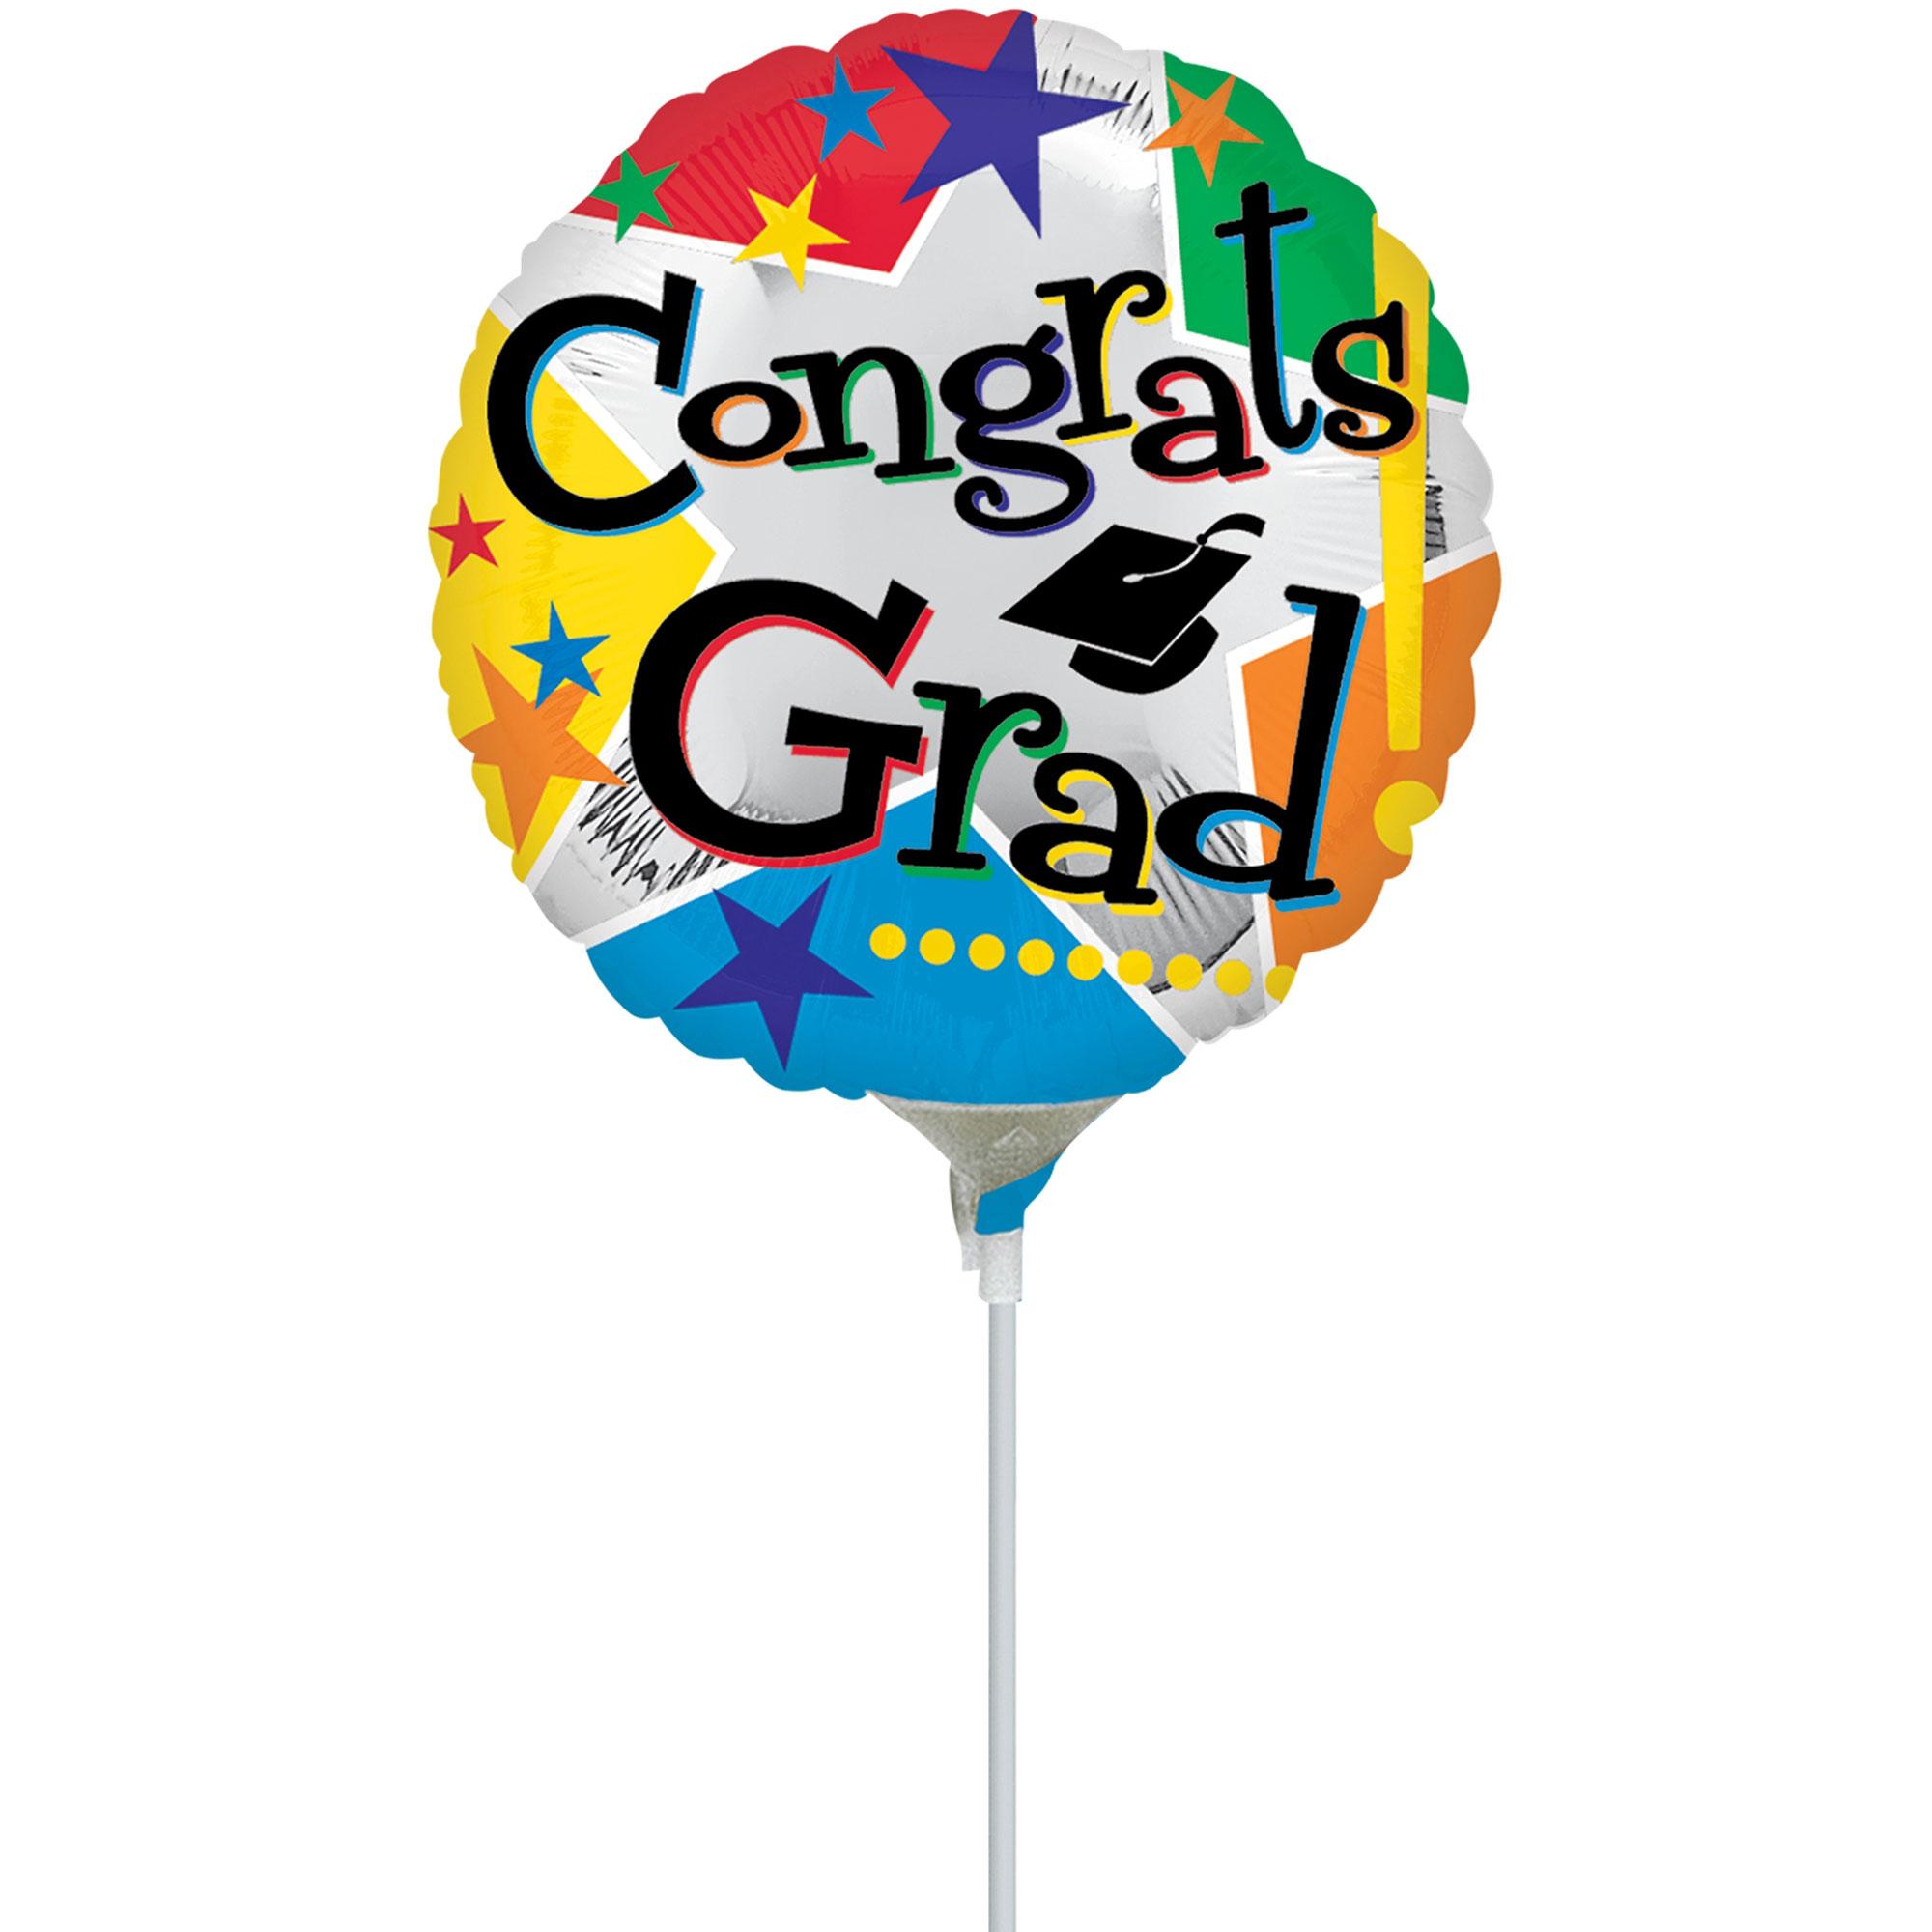 Congrats Graduation Stars Foil Balloon 9in Balloons & Streamers - Party Centre